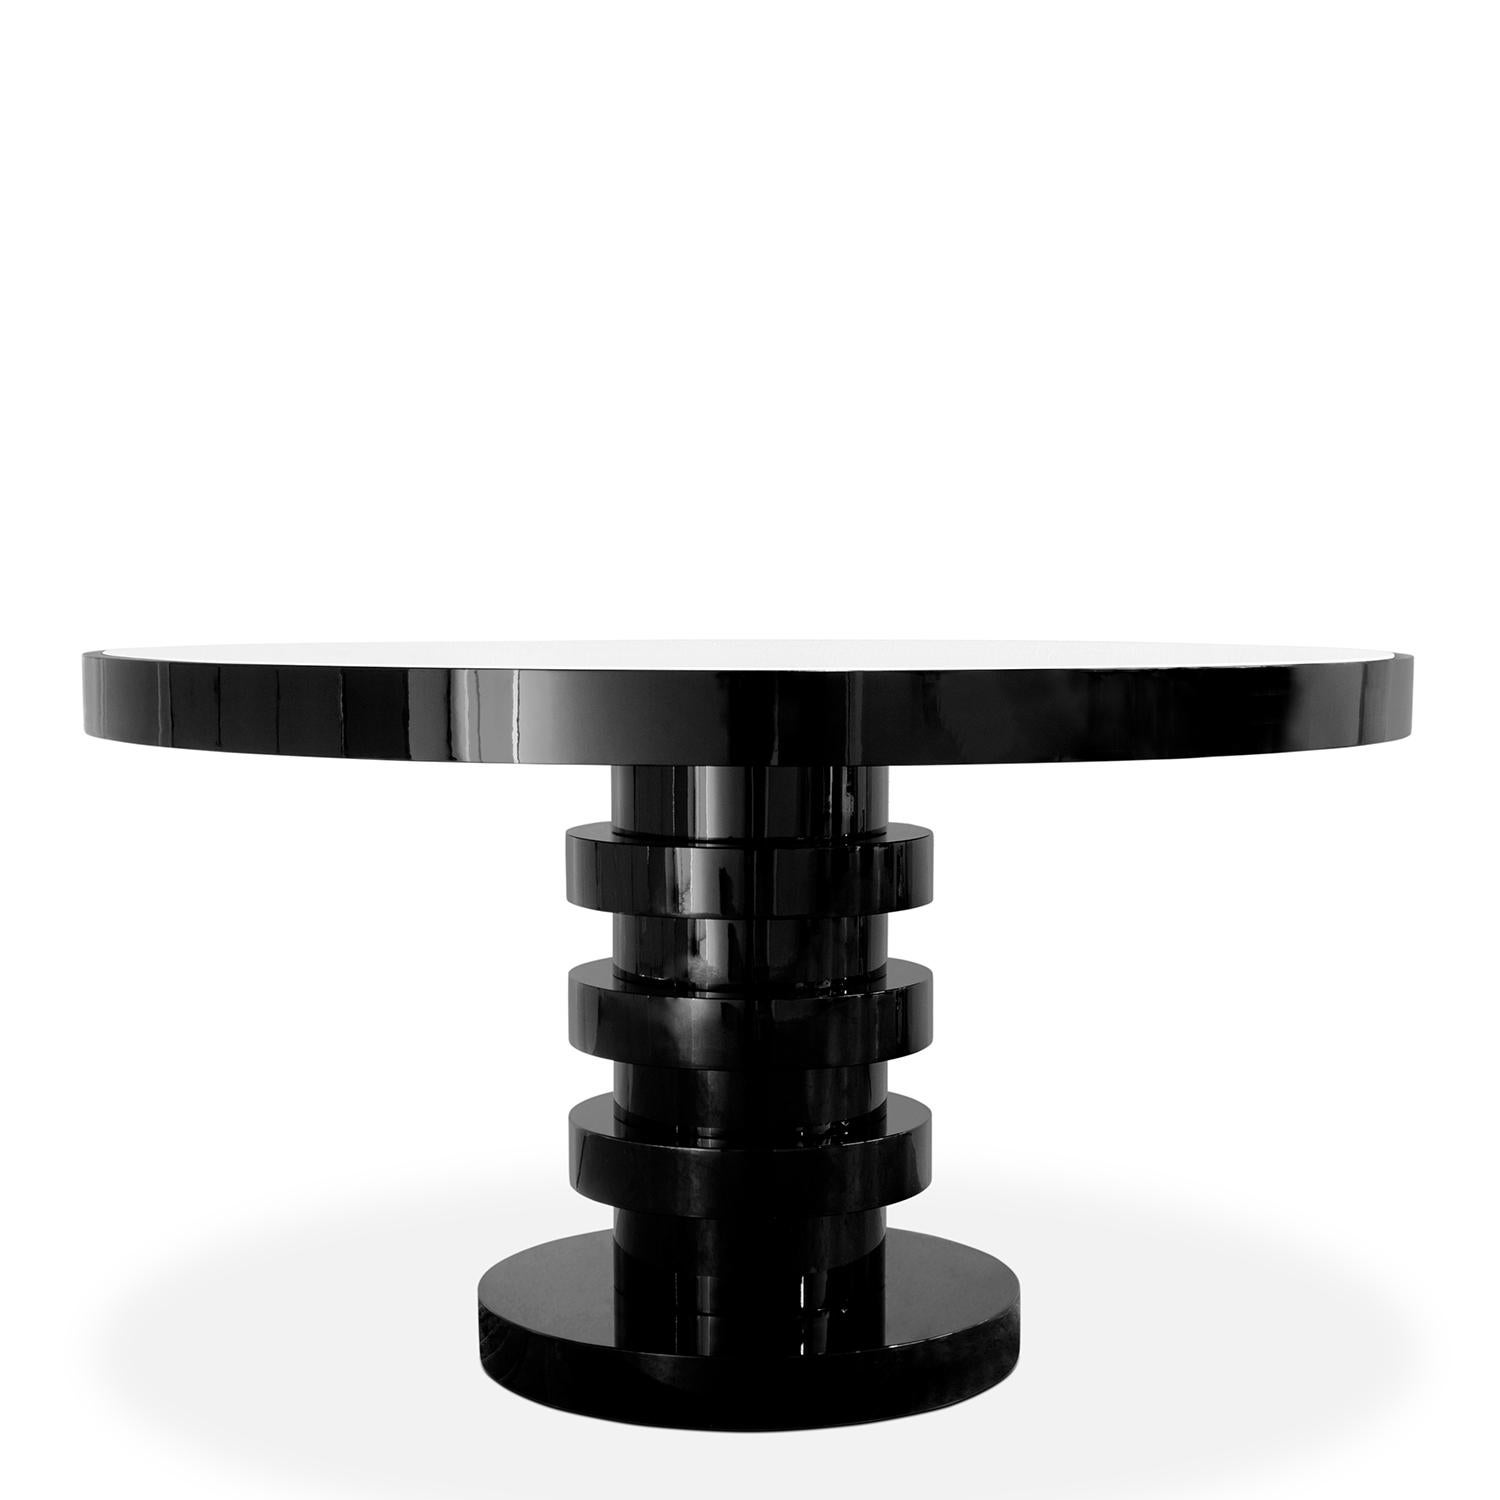 Dining table Nagoya round with structure in solid ash wood,
with ash veneered top with white transparent paint and body 
in ash wood in black lacquered finish.